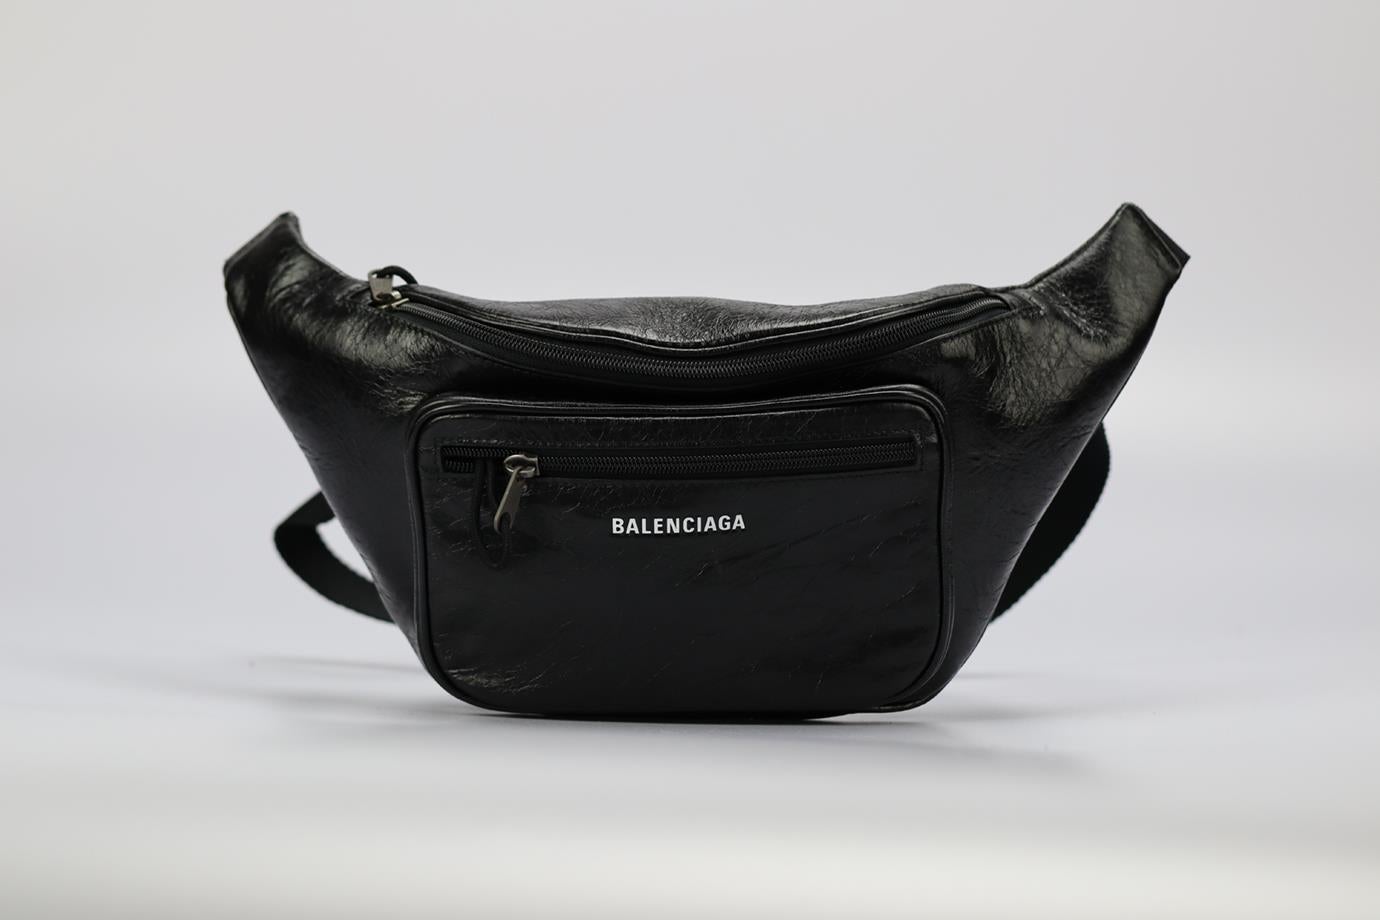 Balenciaga Explorer Crackled Leather Belt Bag. Black. Buckle fastening - Back. Does not come with - dustbag or box. Height: 8.1 In. Width: 14.5 In. Depth: 2.3 In. Handle drop: . Strap drop: 11.3 In. Condition: Used. Very good condition - Worn once.